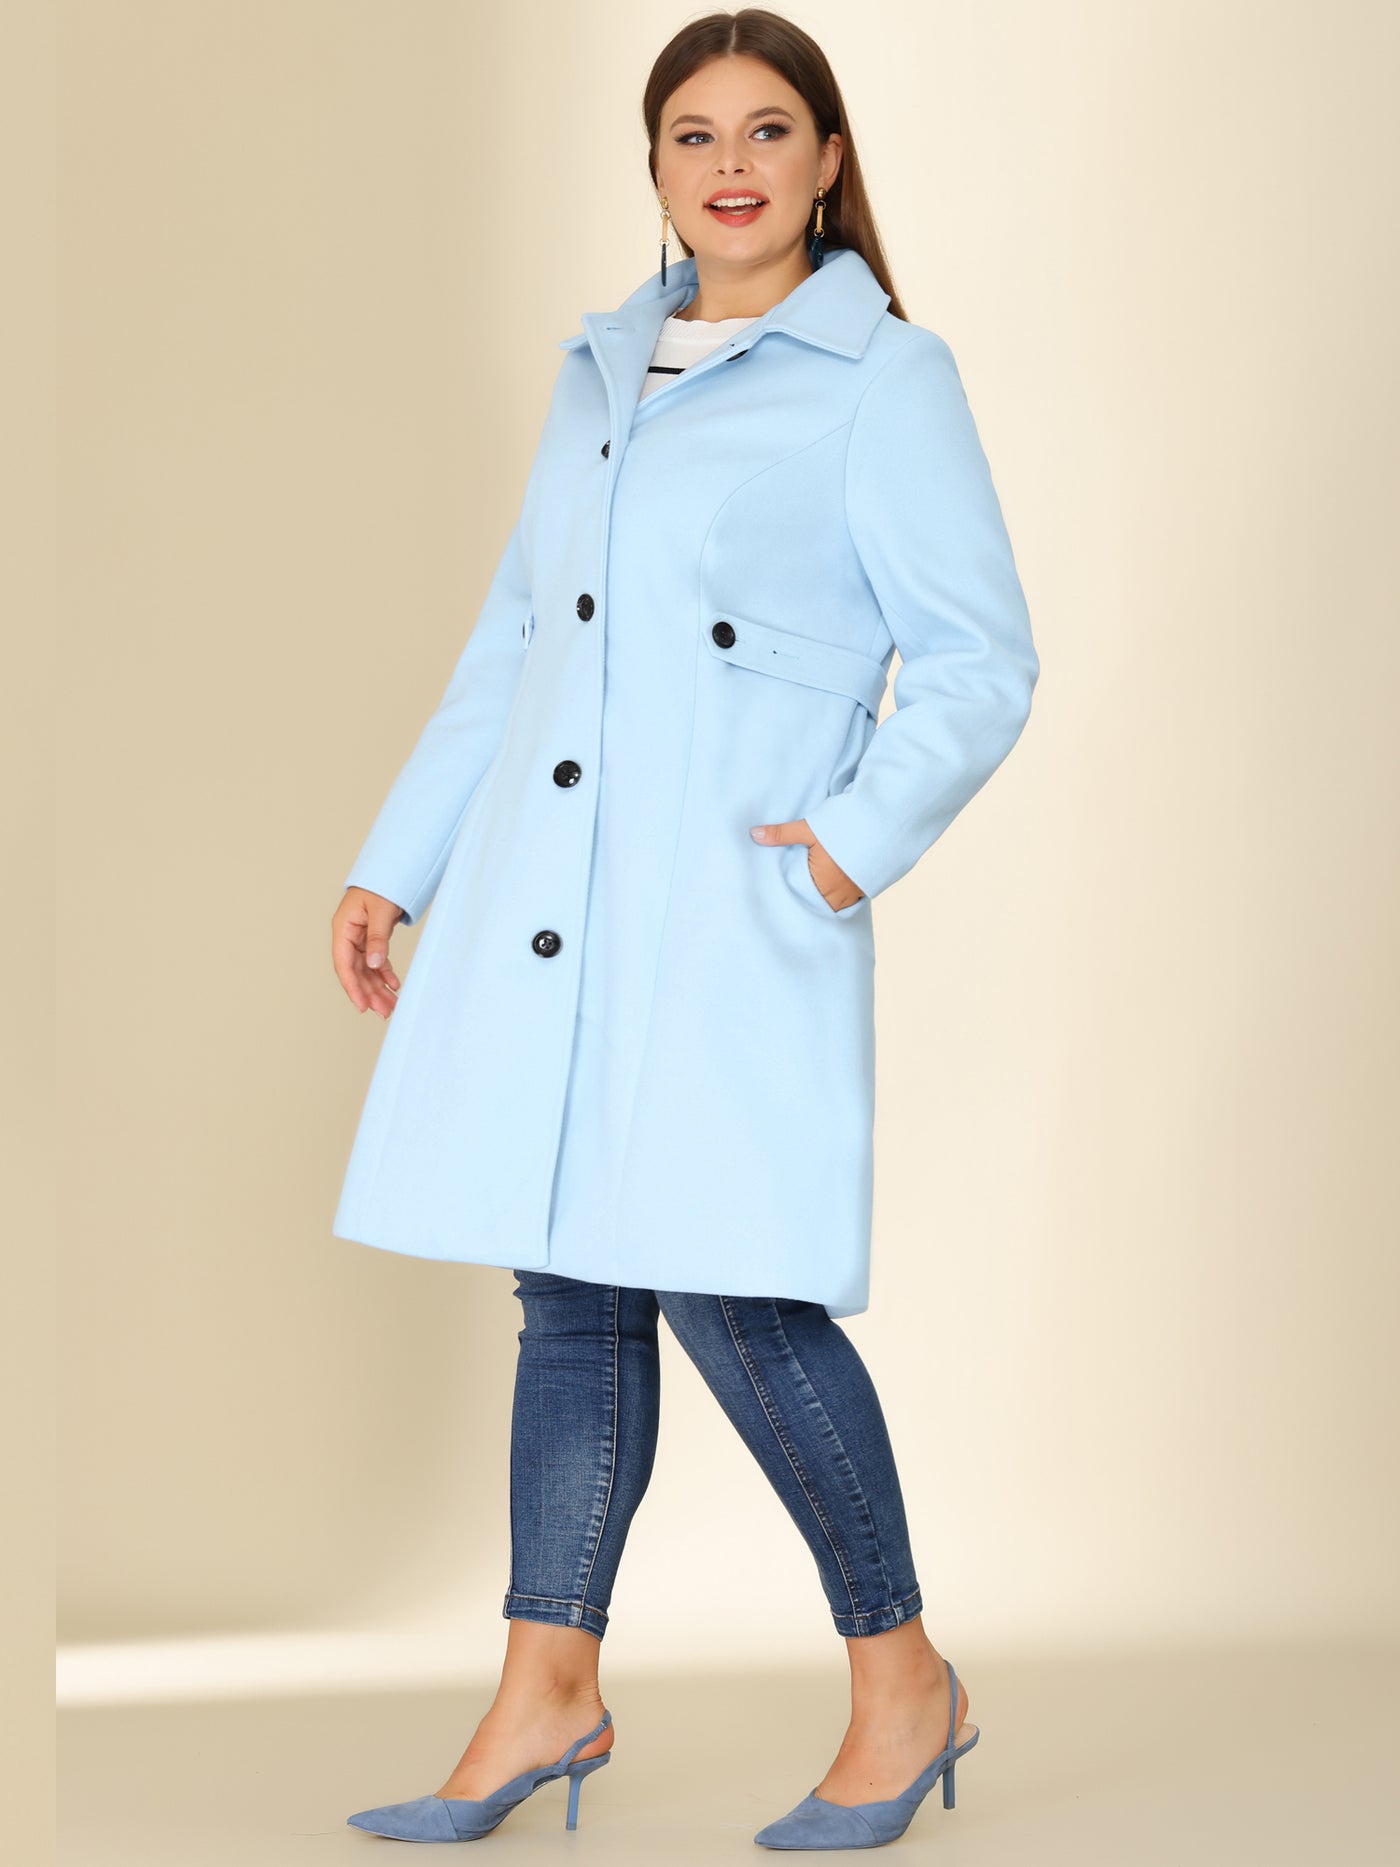 Bublédon Polyester H Line Winter Single Breasted Coat Jacket